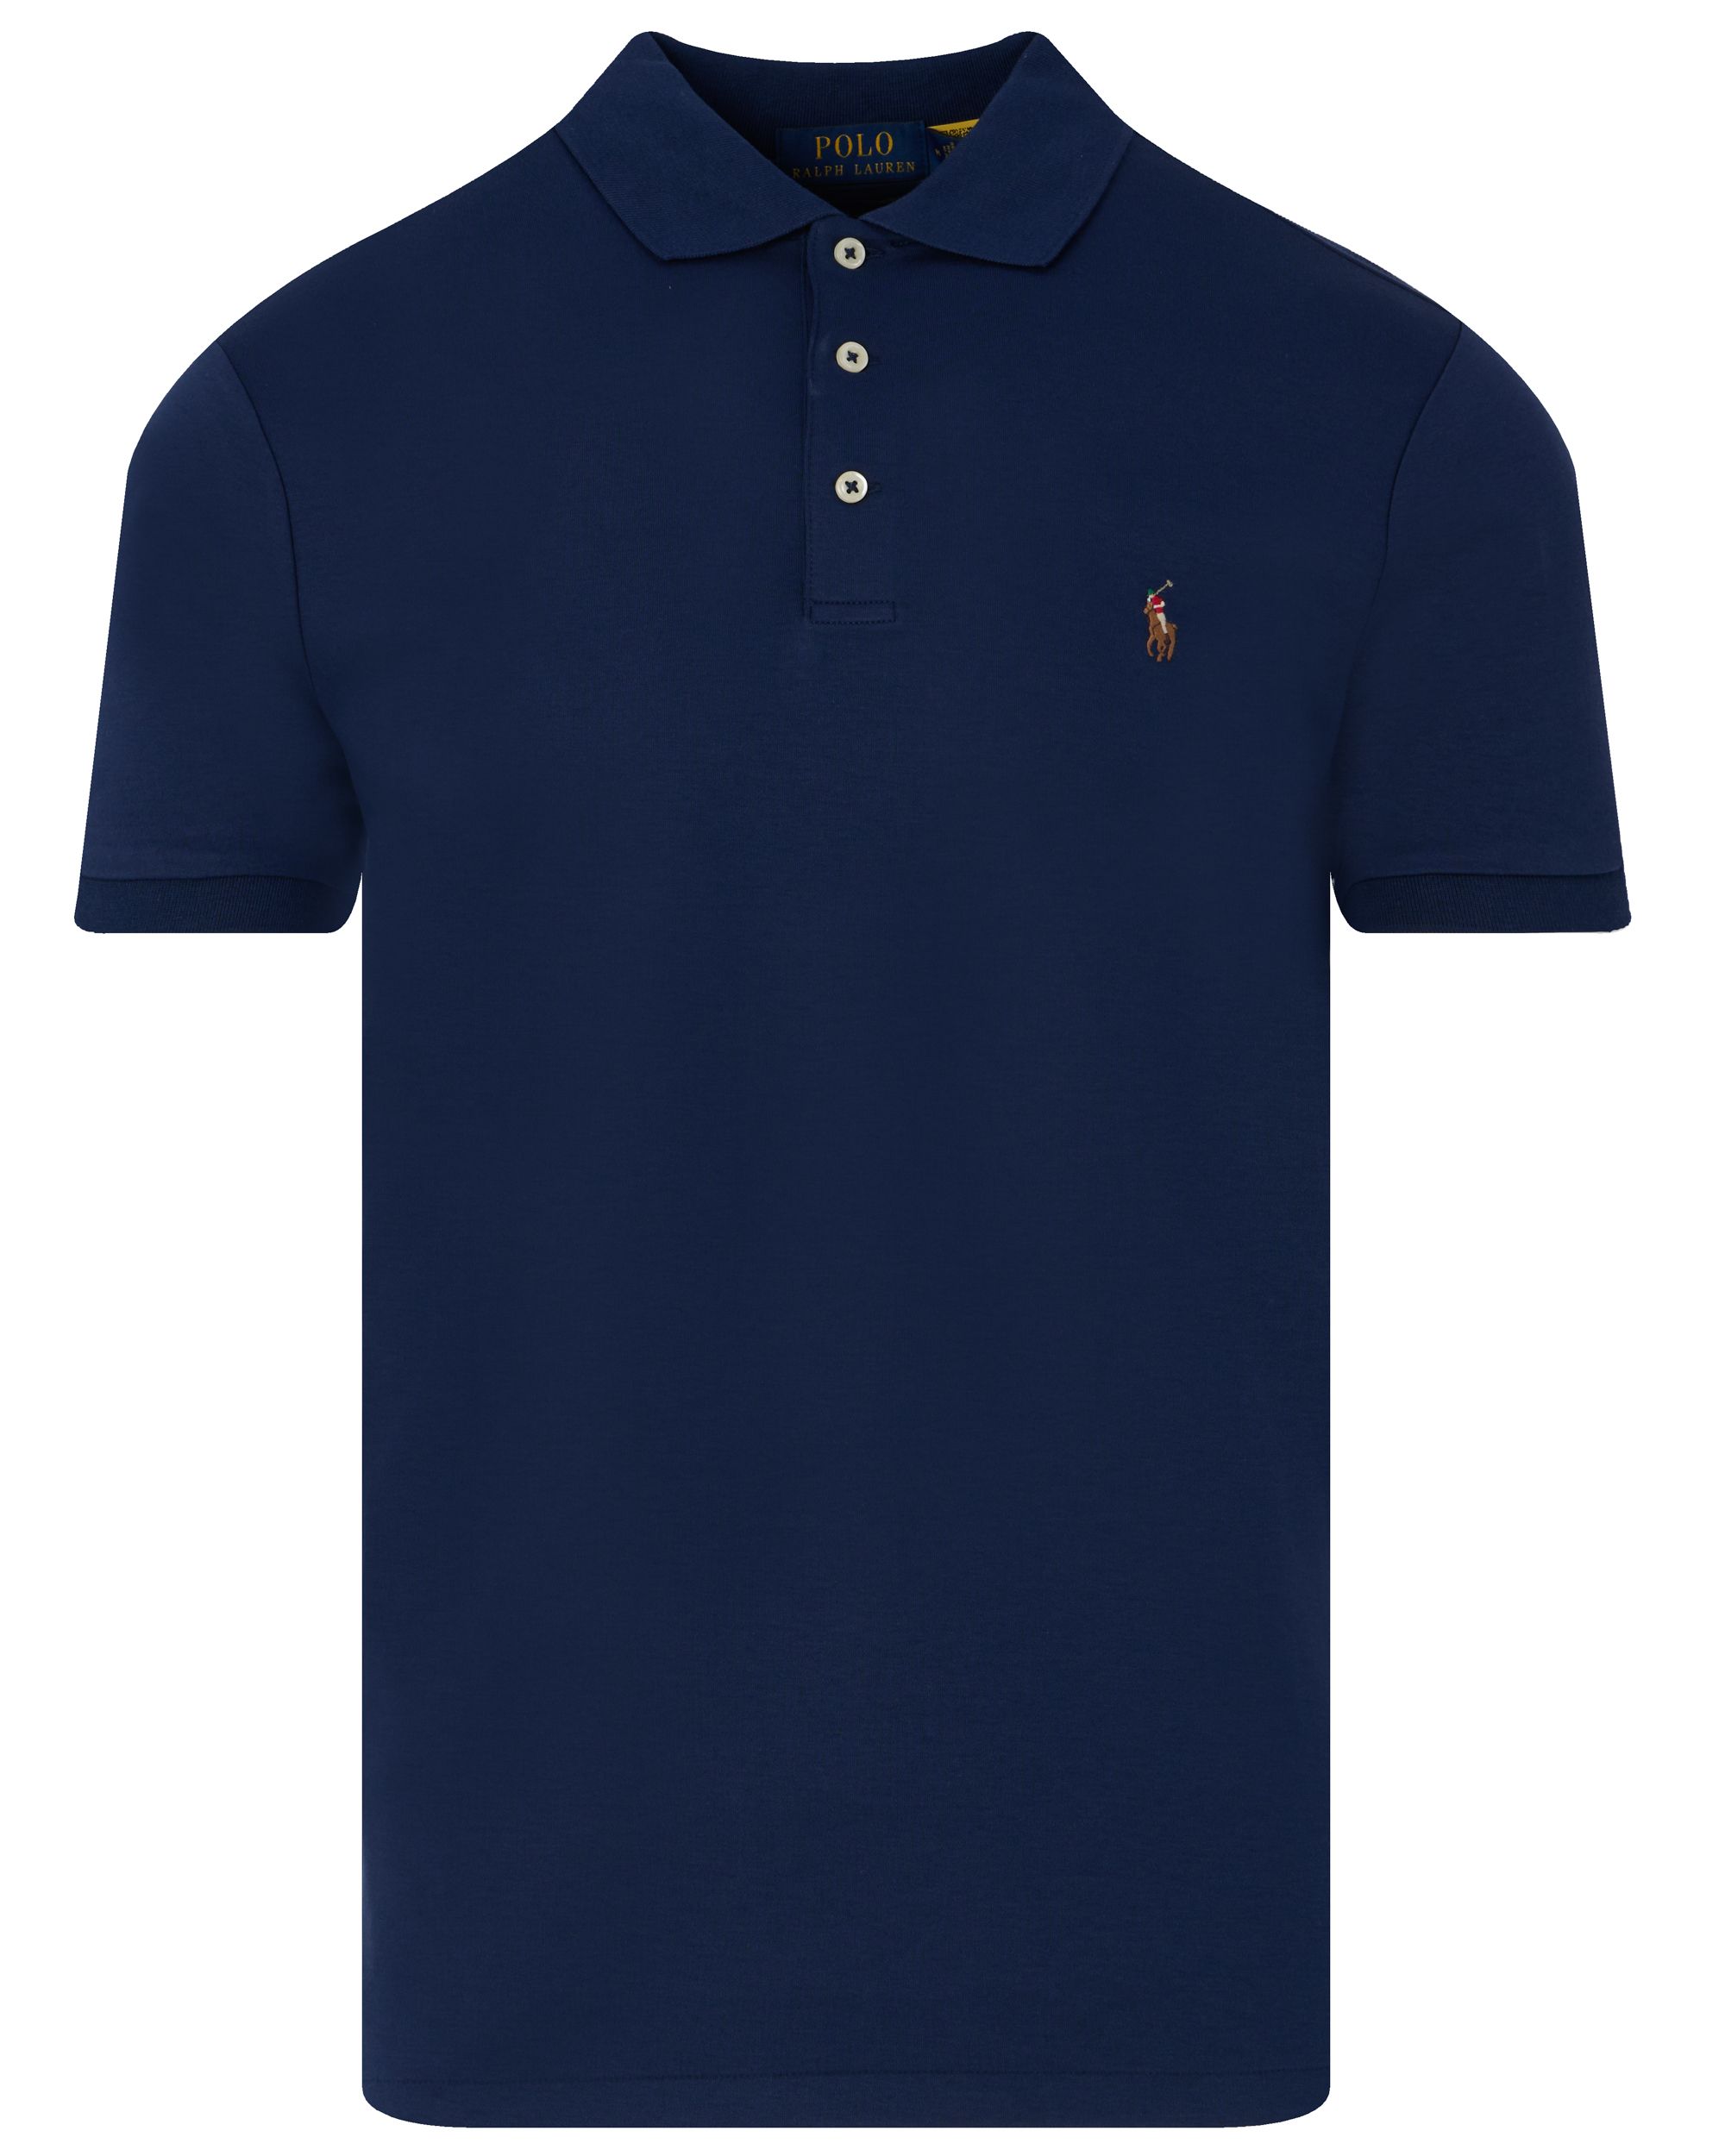 Polo Ralph Lauren Slim Fit Soft Touch Polo KM Donker blauw 086568-001-L